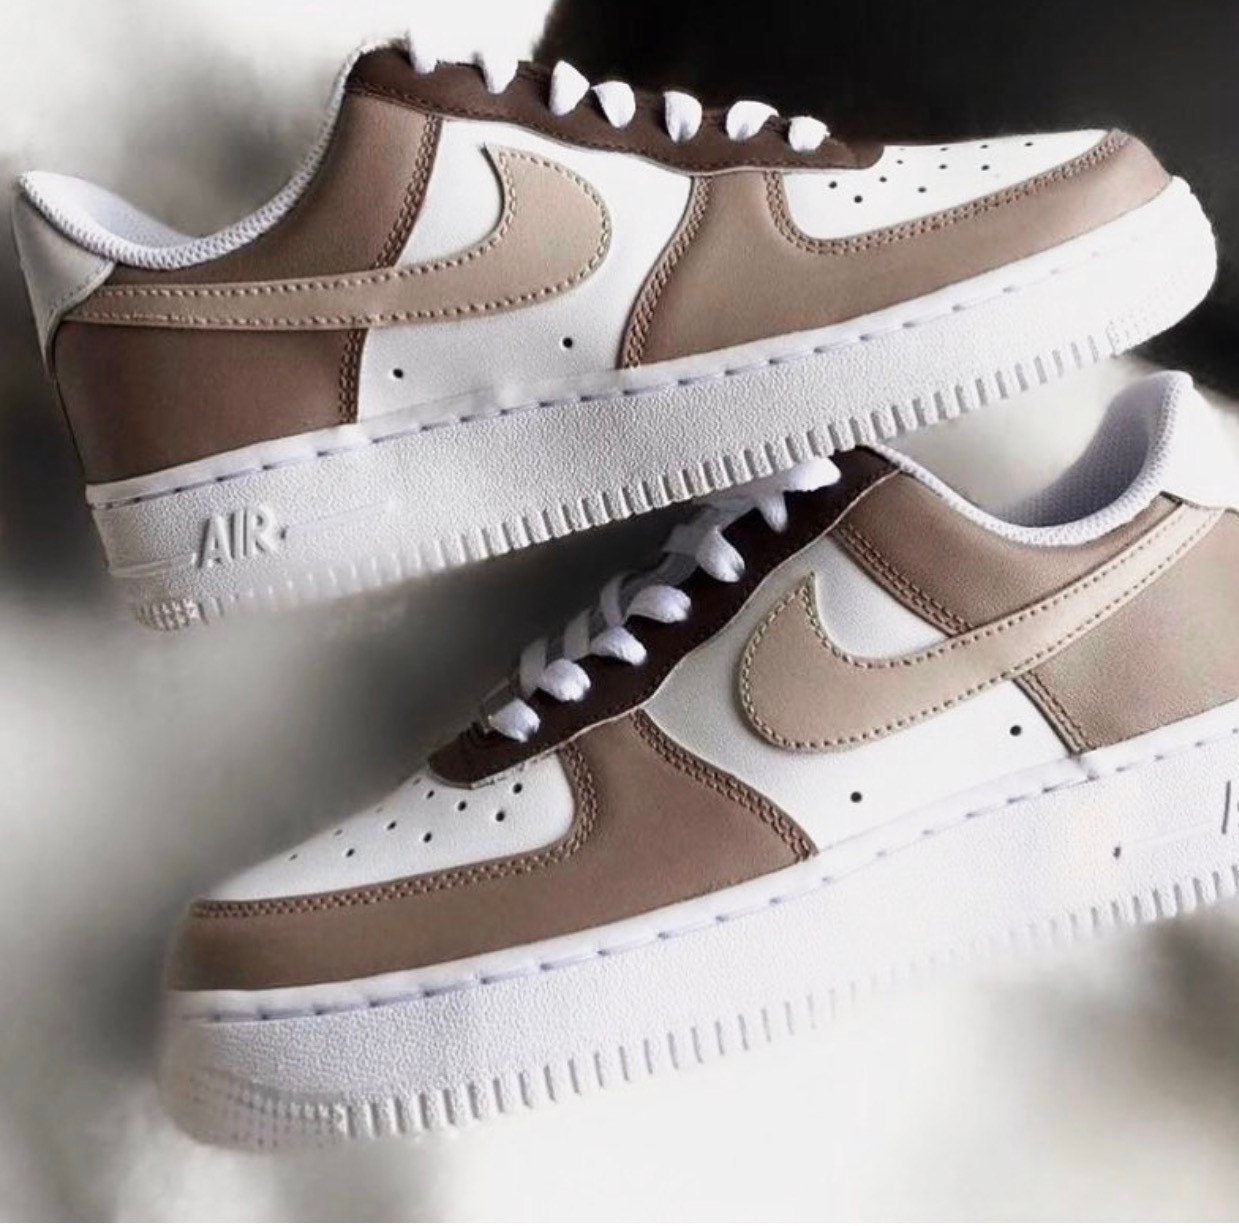 Nike Air Force 1 '82 men's sneaker. Color is a dark chocolate brown. Size  10